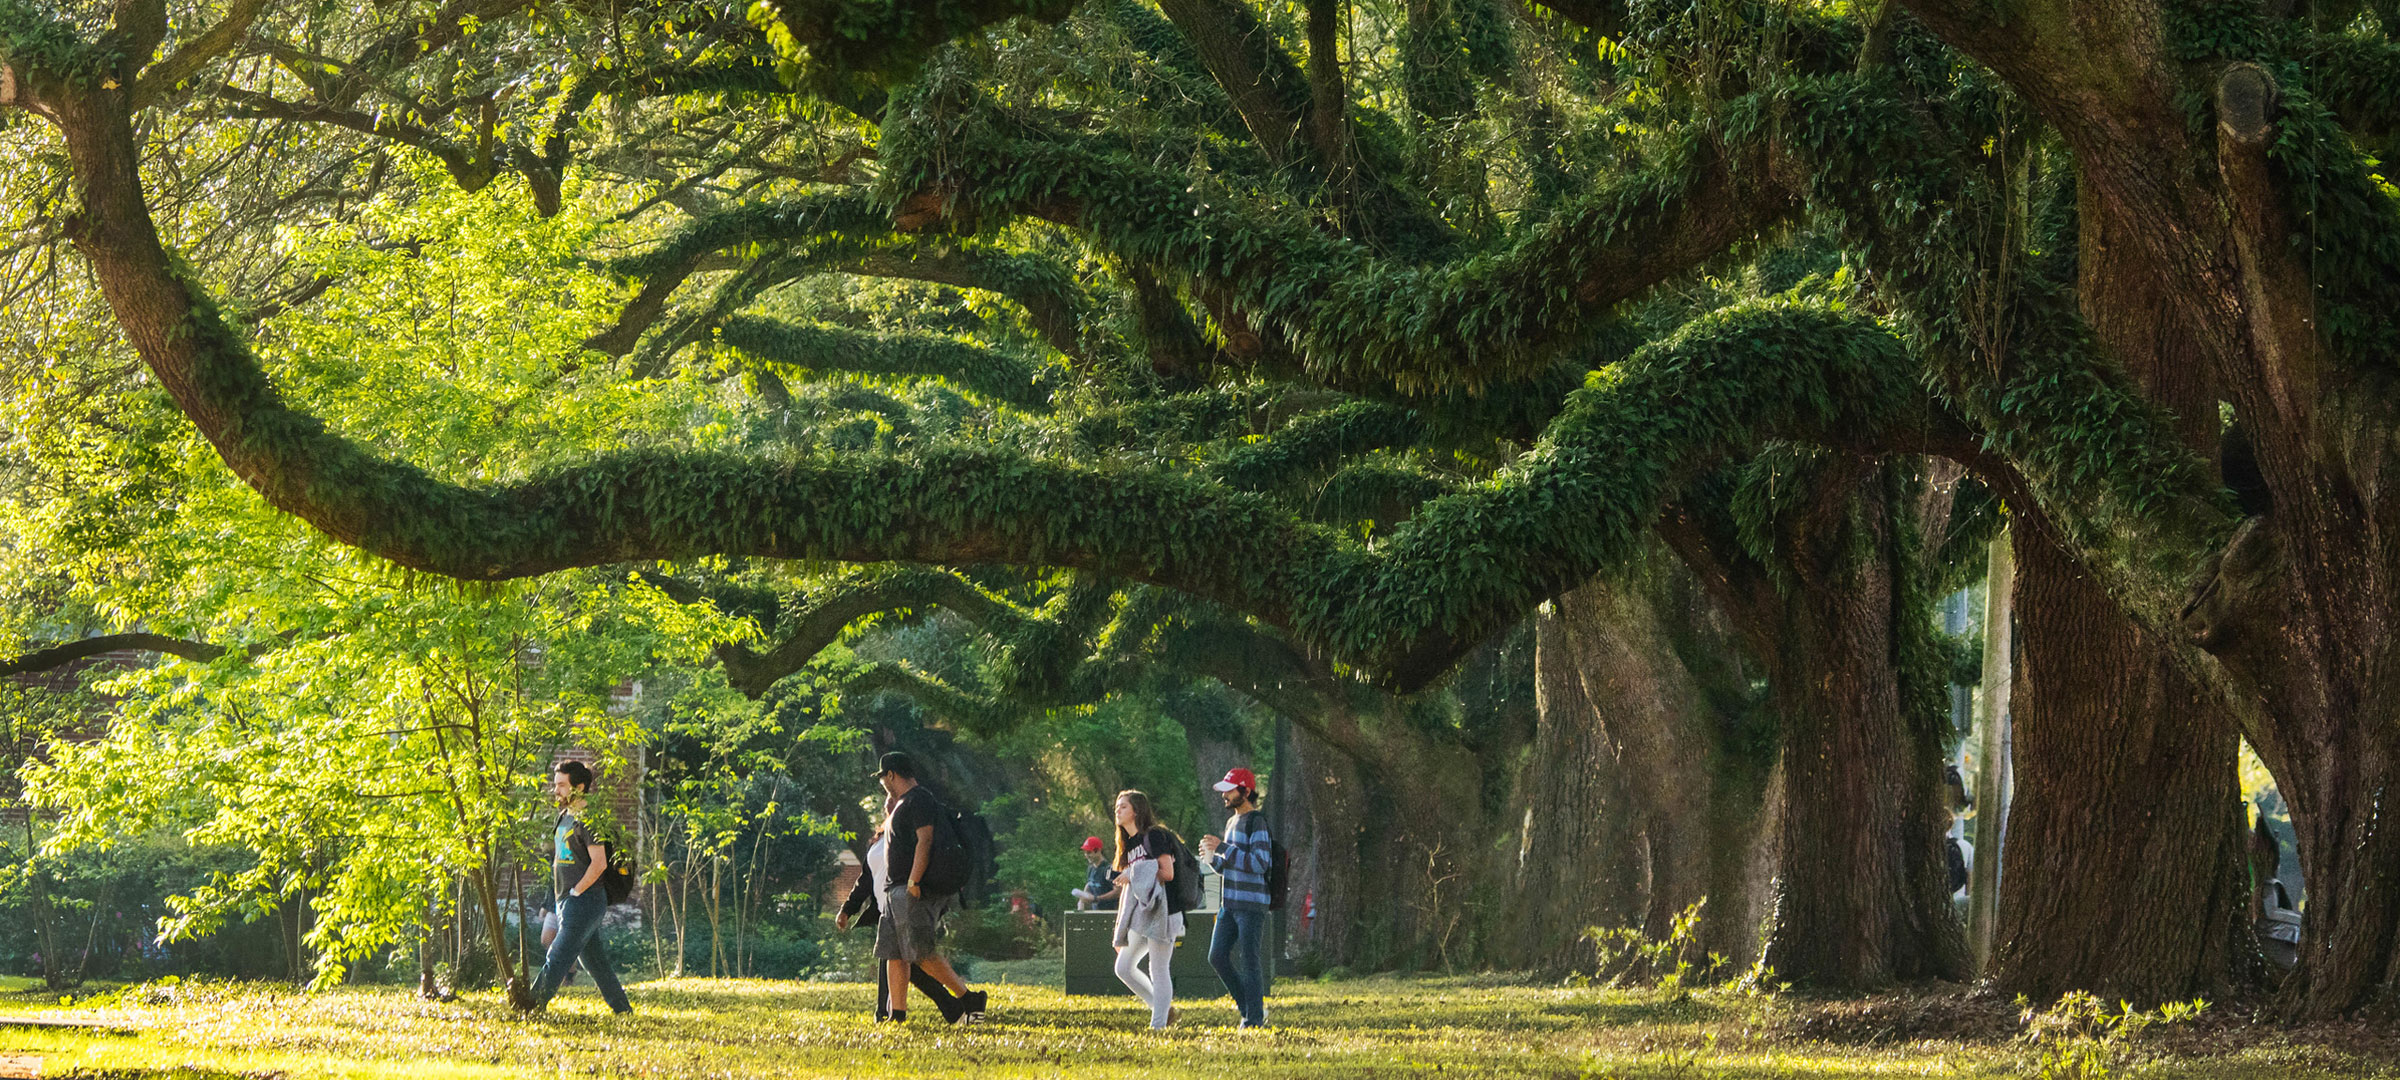 Bryman College students walking under the large oak trees on campus